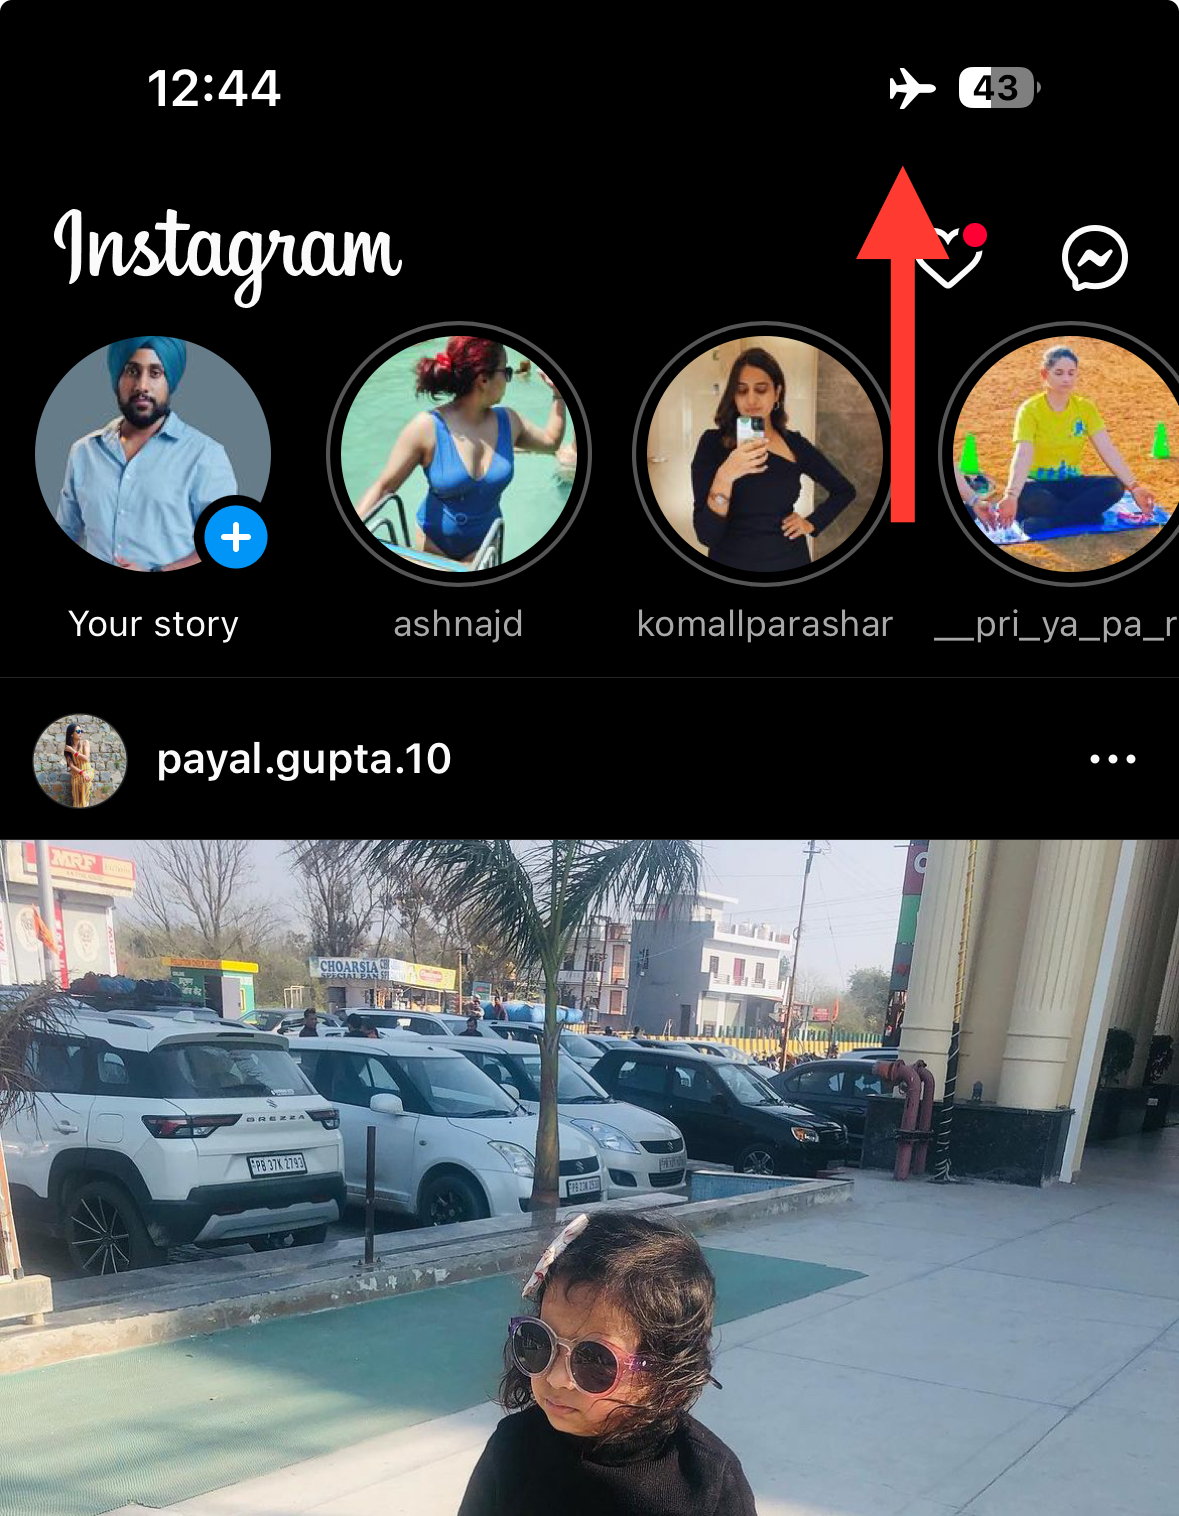 How to view Instagram stories without them knowing (5 Options) 4